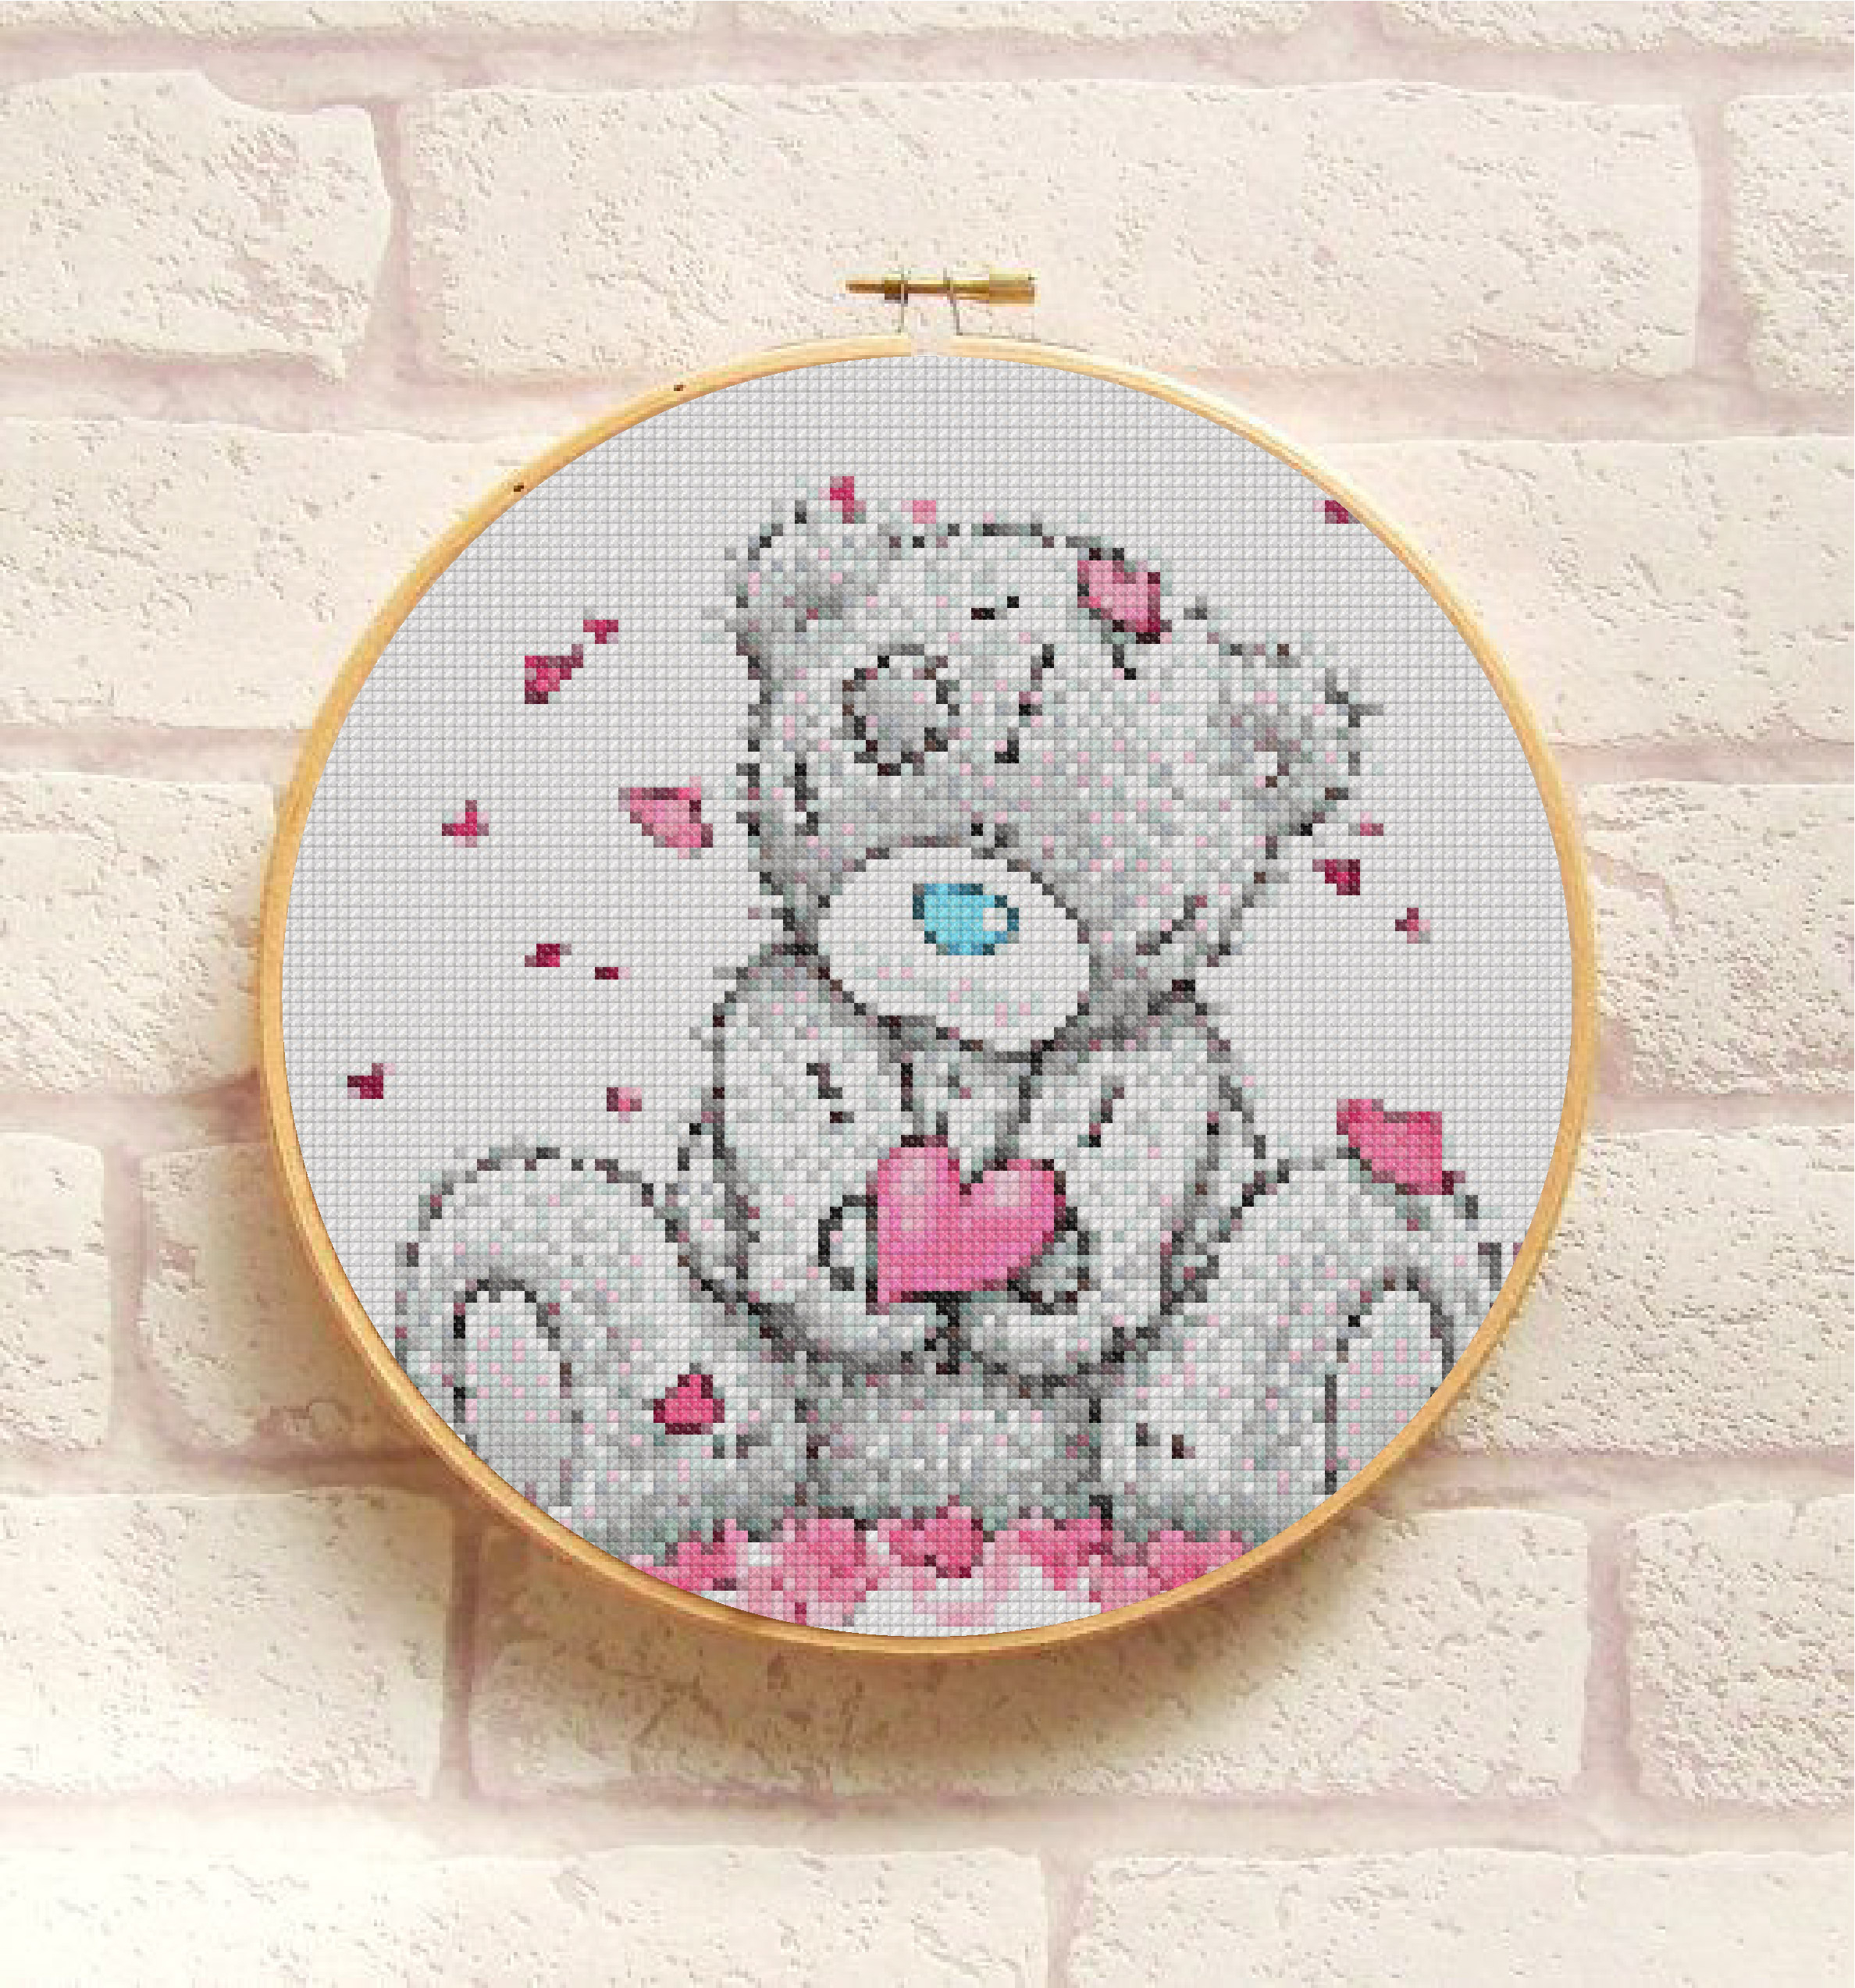 Embroidery Cross Stitch Patterns Teddy Bear Cross Stitch Pattern Pdf Embroidery Cute Nursery Wall Decor Disney Animal Bear Counted Cross Stitch Chart Instant Download